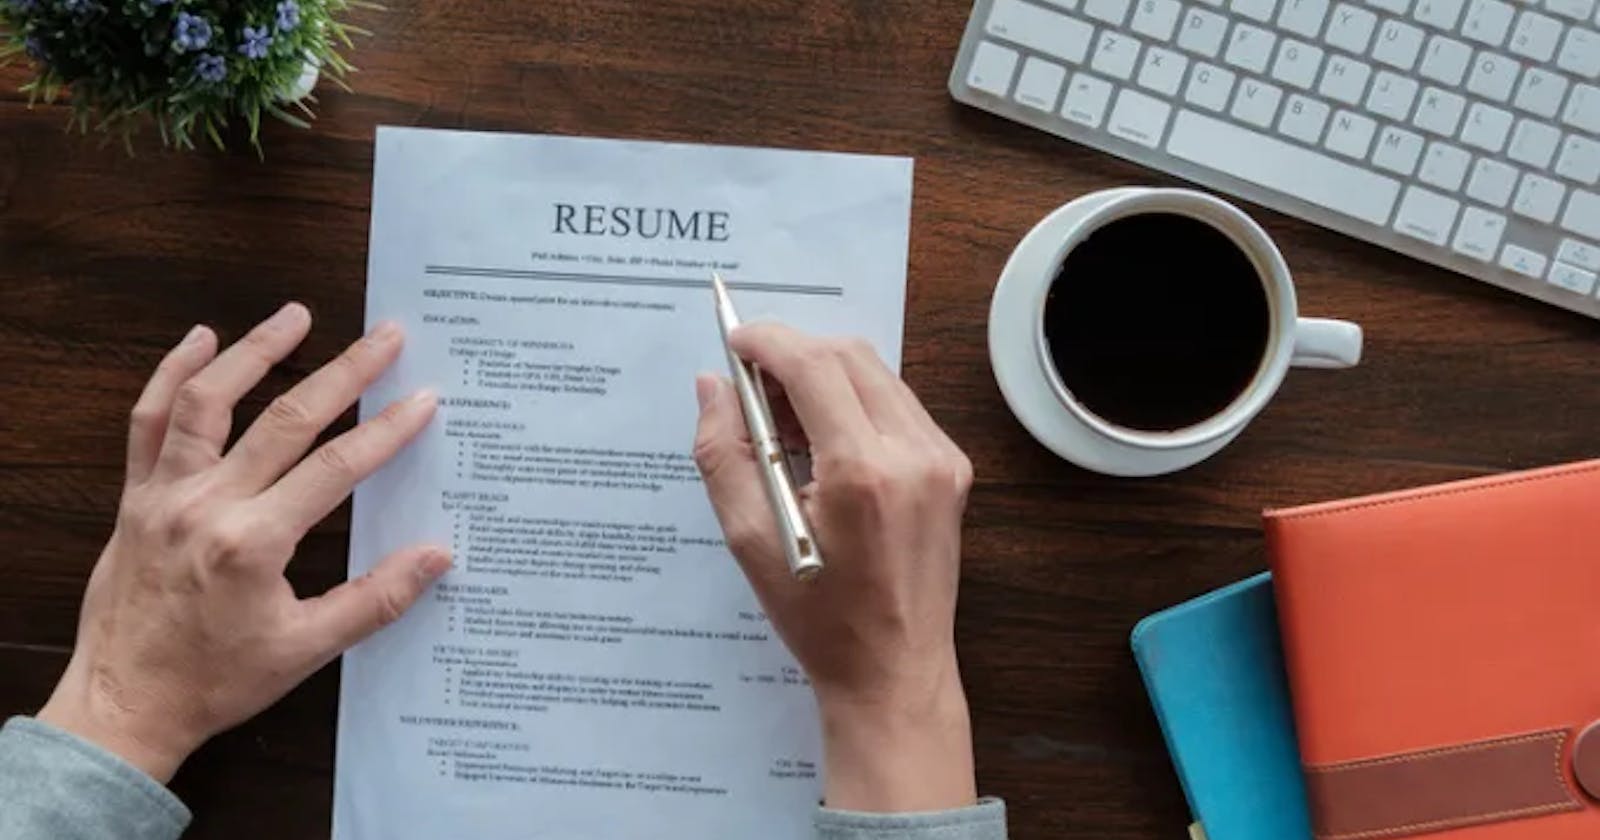 How to Write Resume in Html by using Elements  :